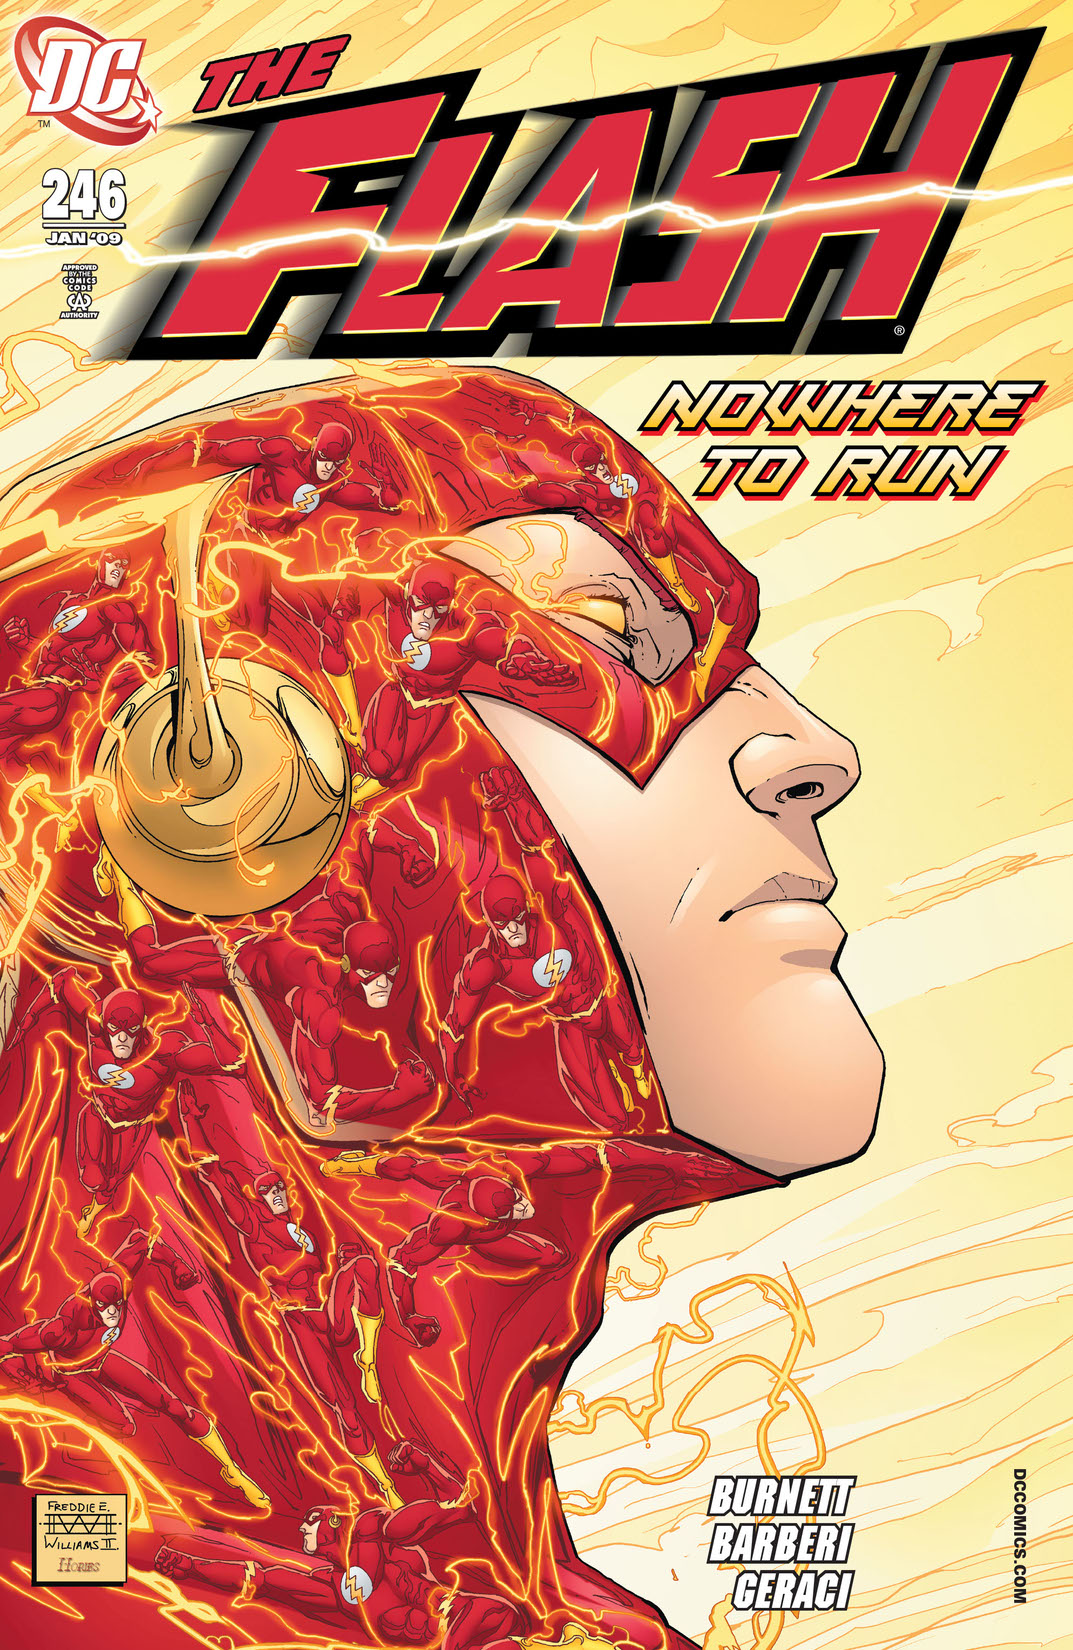 The Flash (1987-) #246 preview images